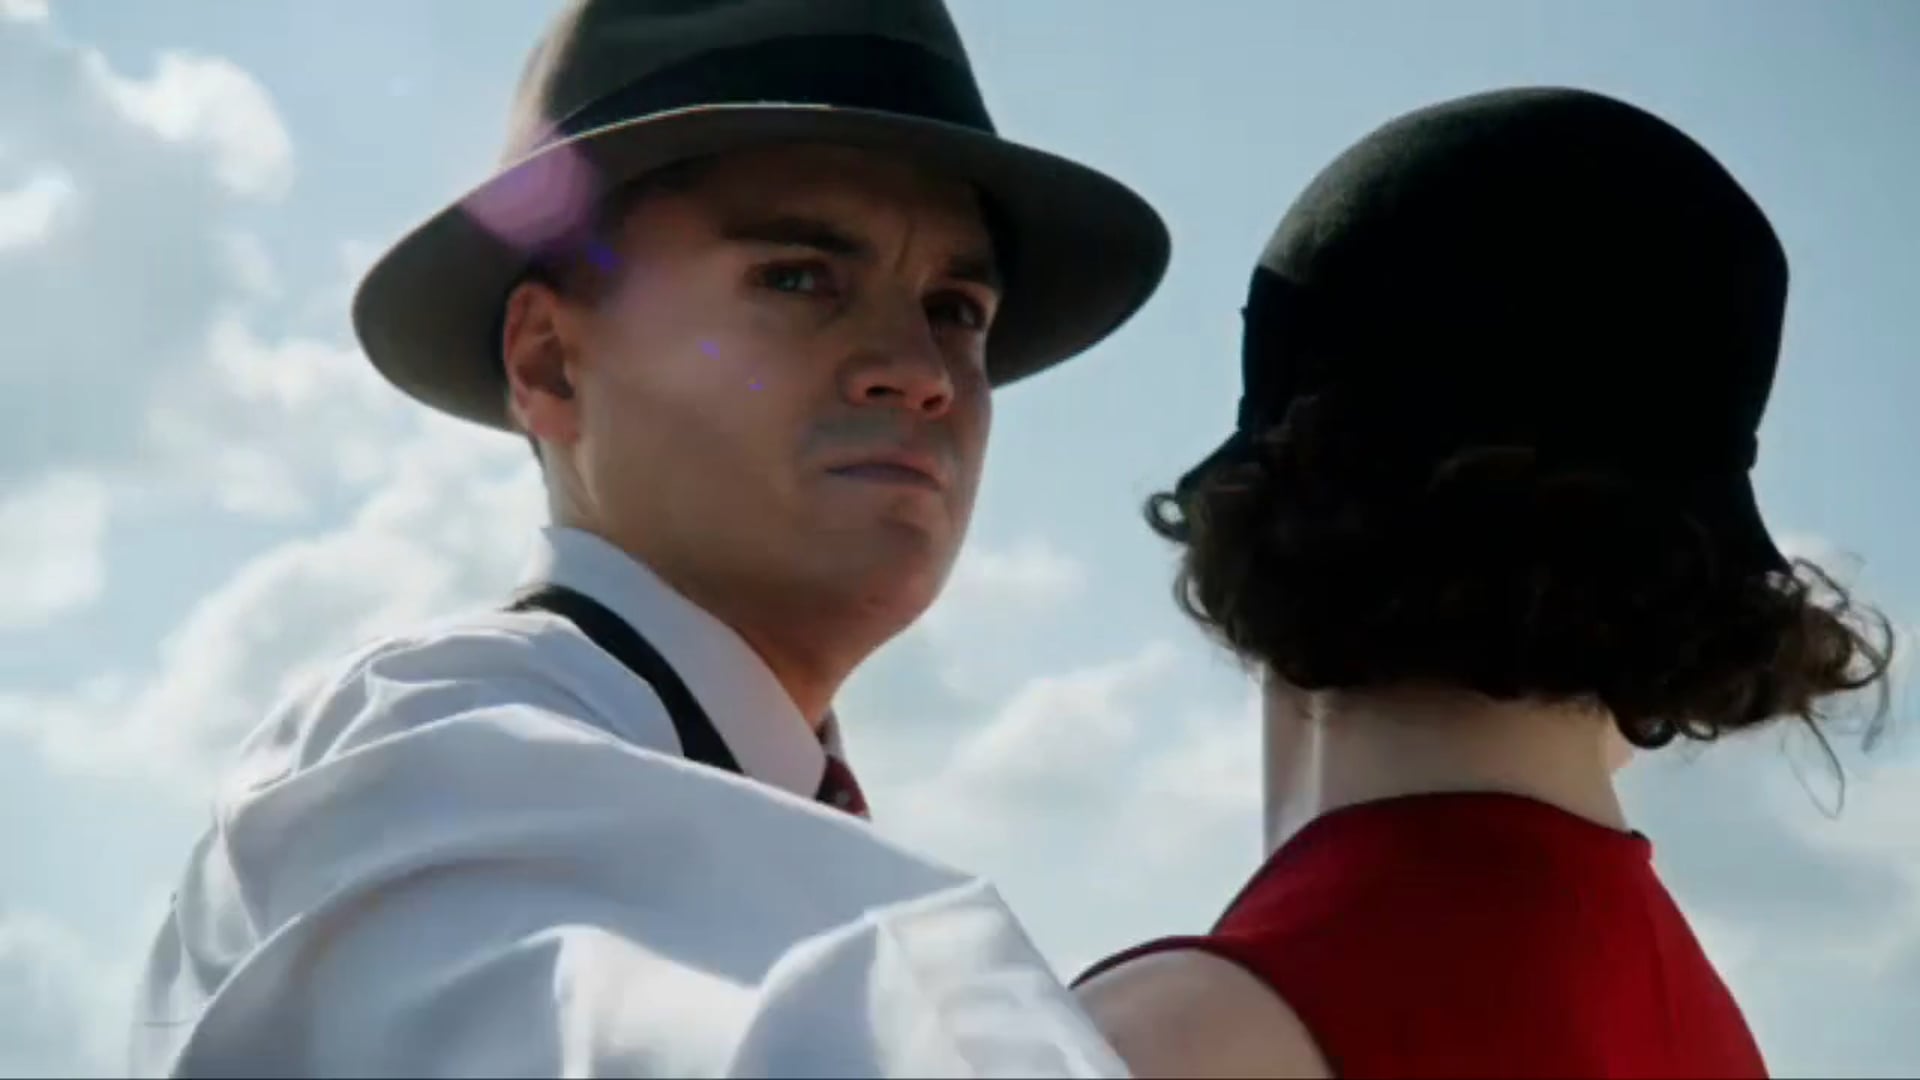 History: Bonnie & Clyde "Grangster" Promo